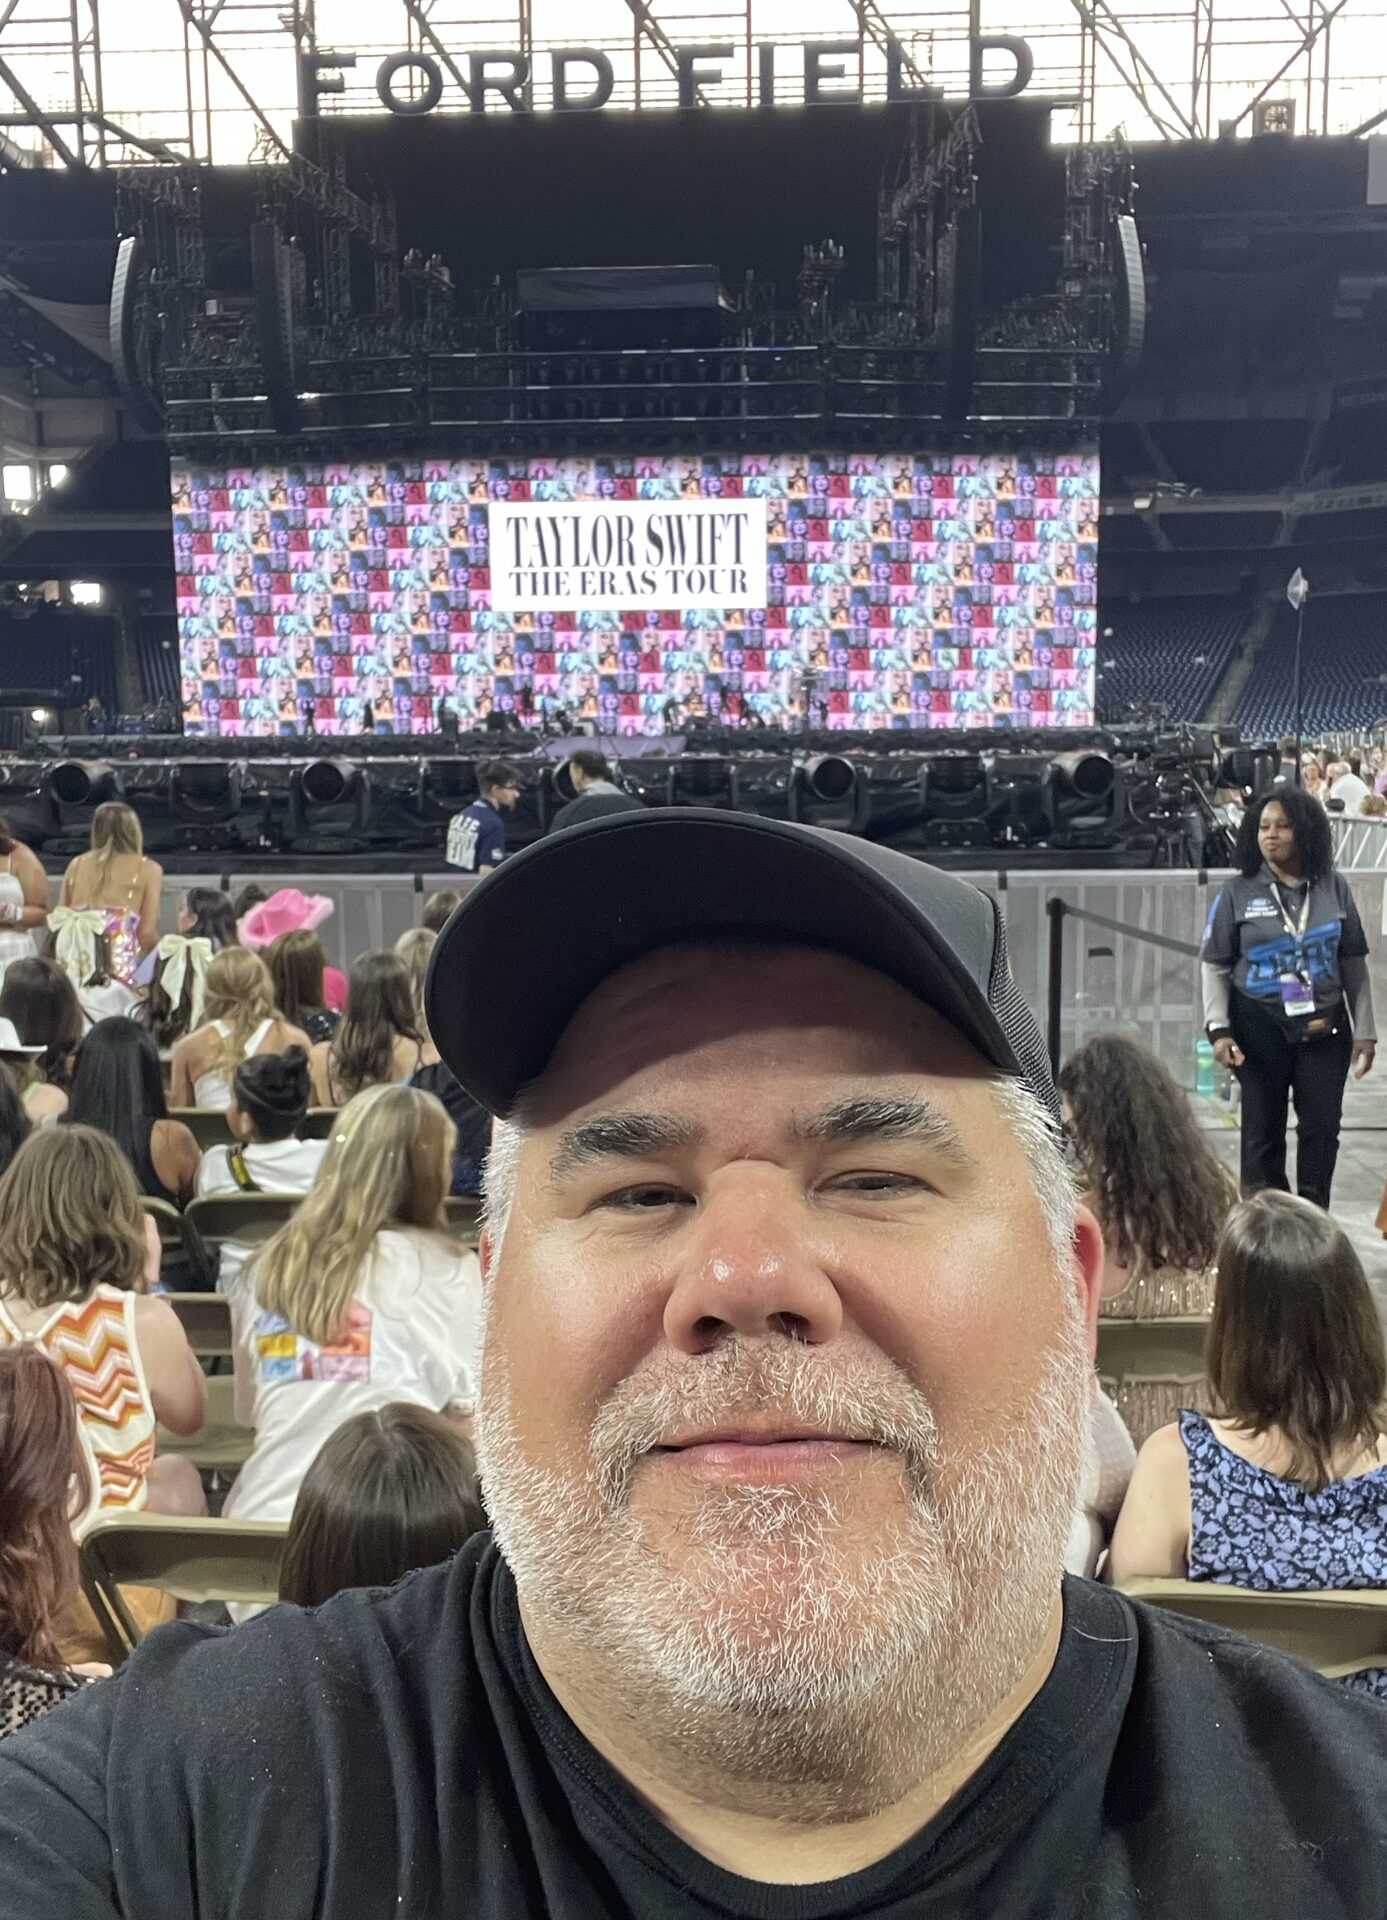 Old Guy at a Taylor Swift show